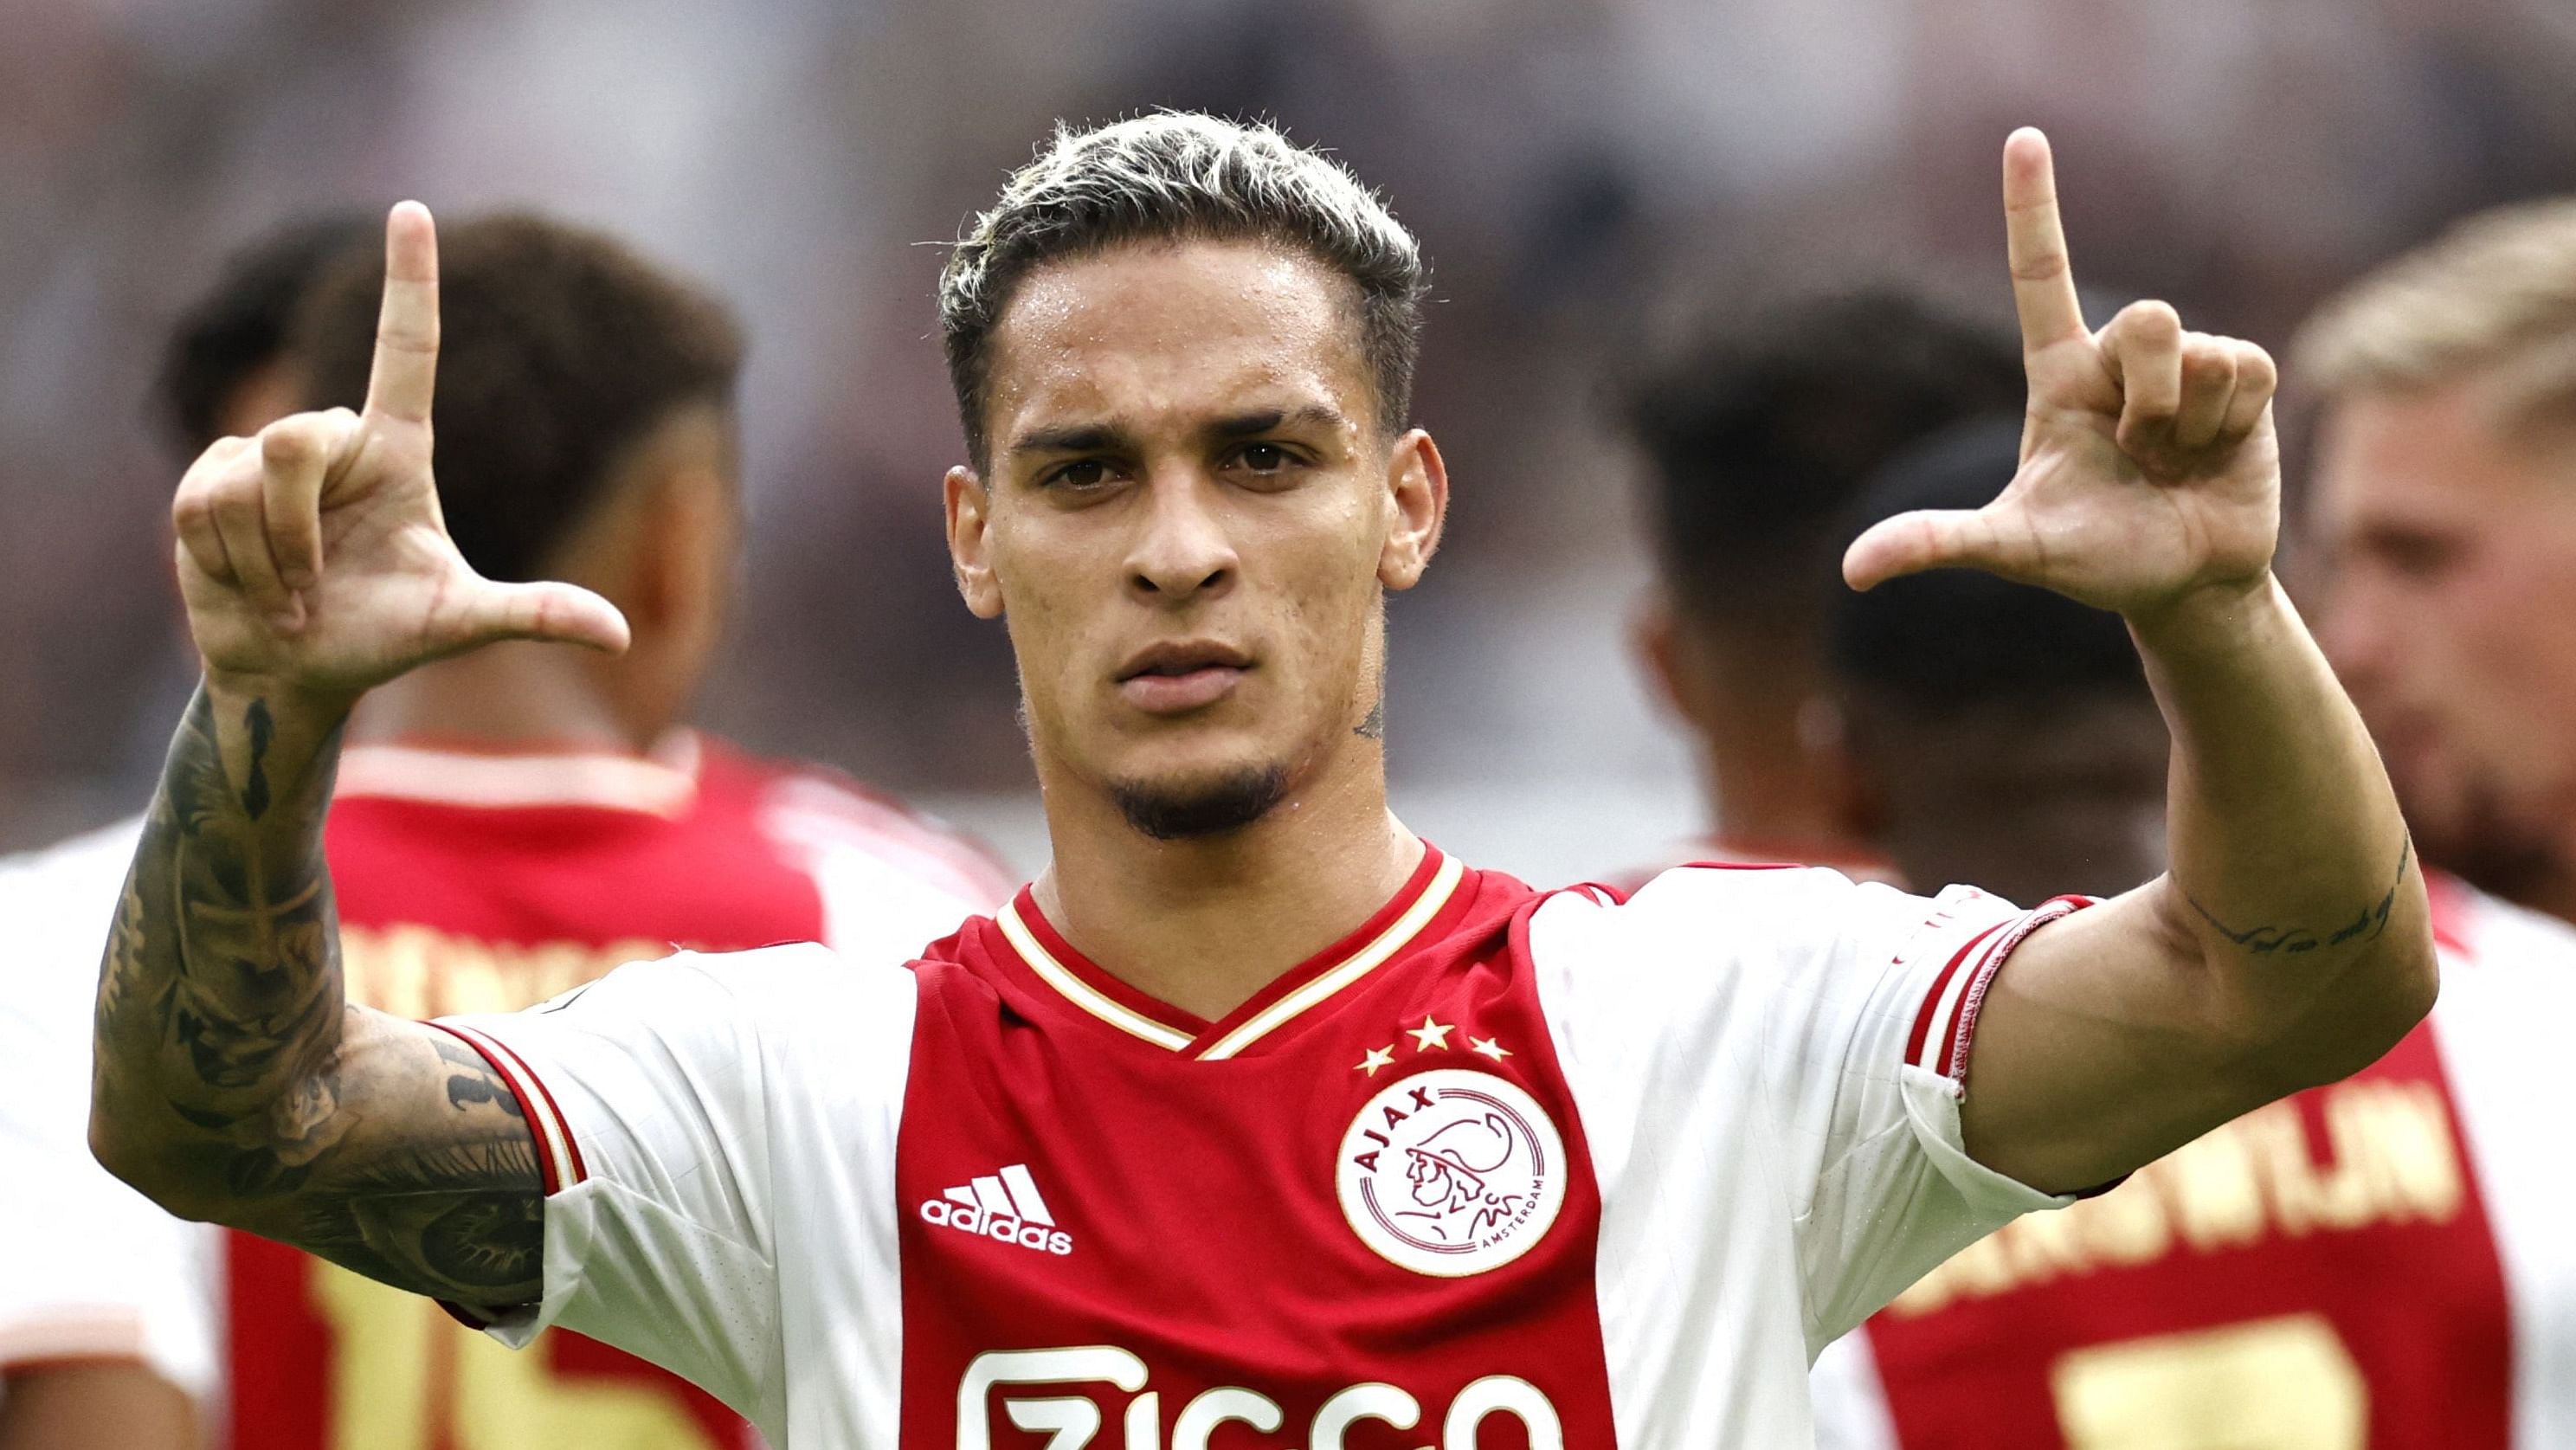 Antony registered 12 goals and 10 assists in 33 games in all competitions for Ajax last season as they won their third consecutive Eredivisie title. Credit: AFP File Photo